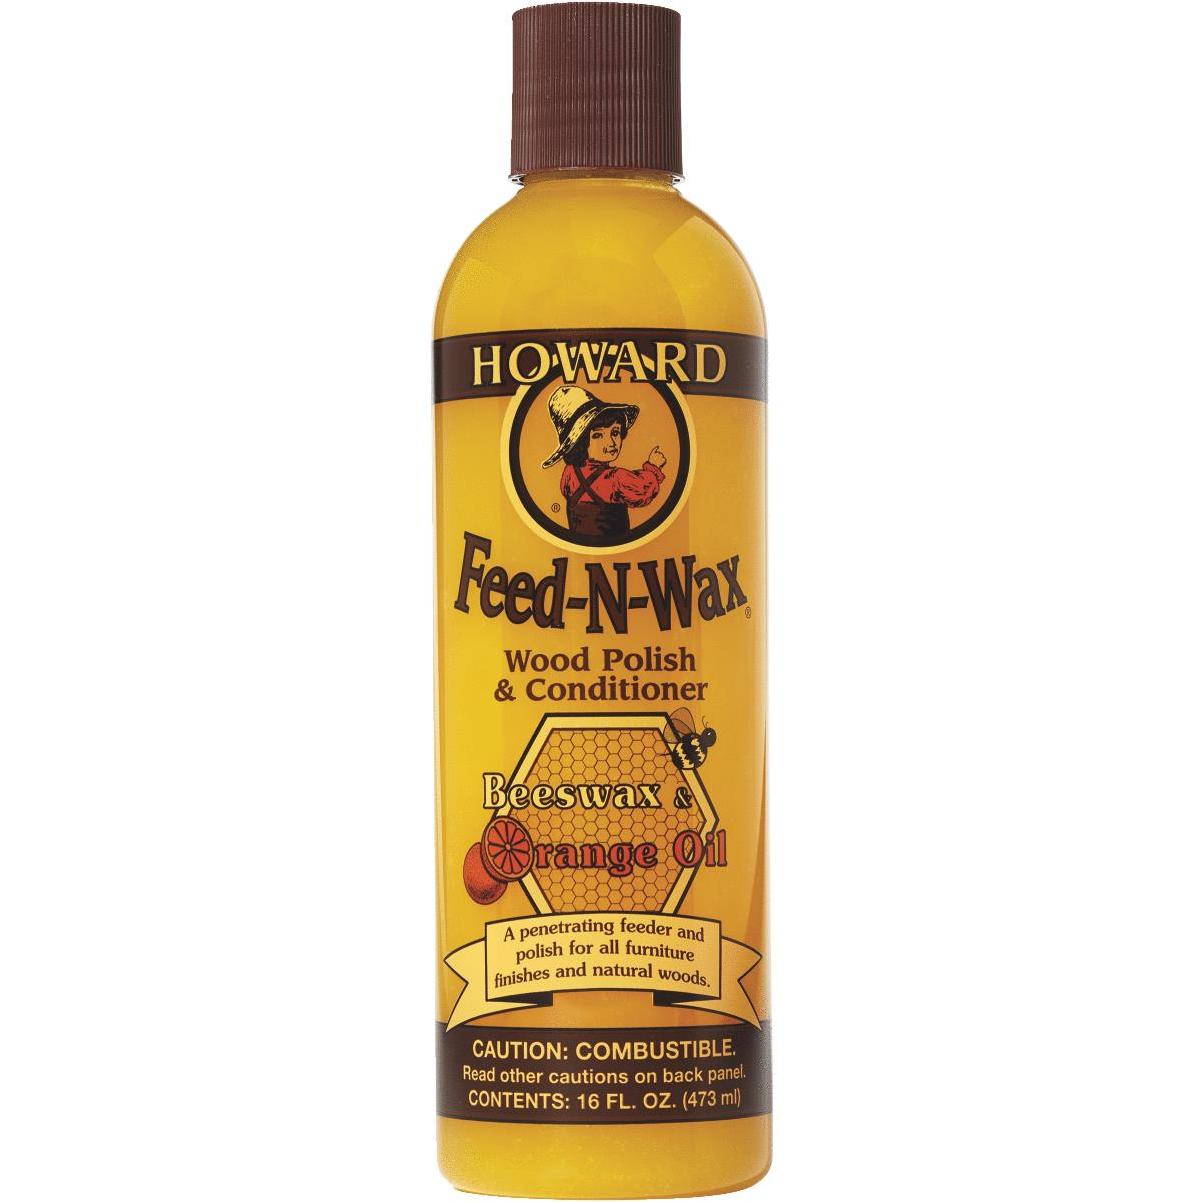 Howard Feed-N-Wax Wood Polish & Conditioner ( Select Size ) Power Tool Services